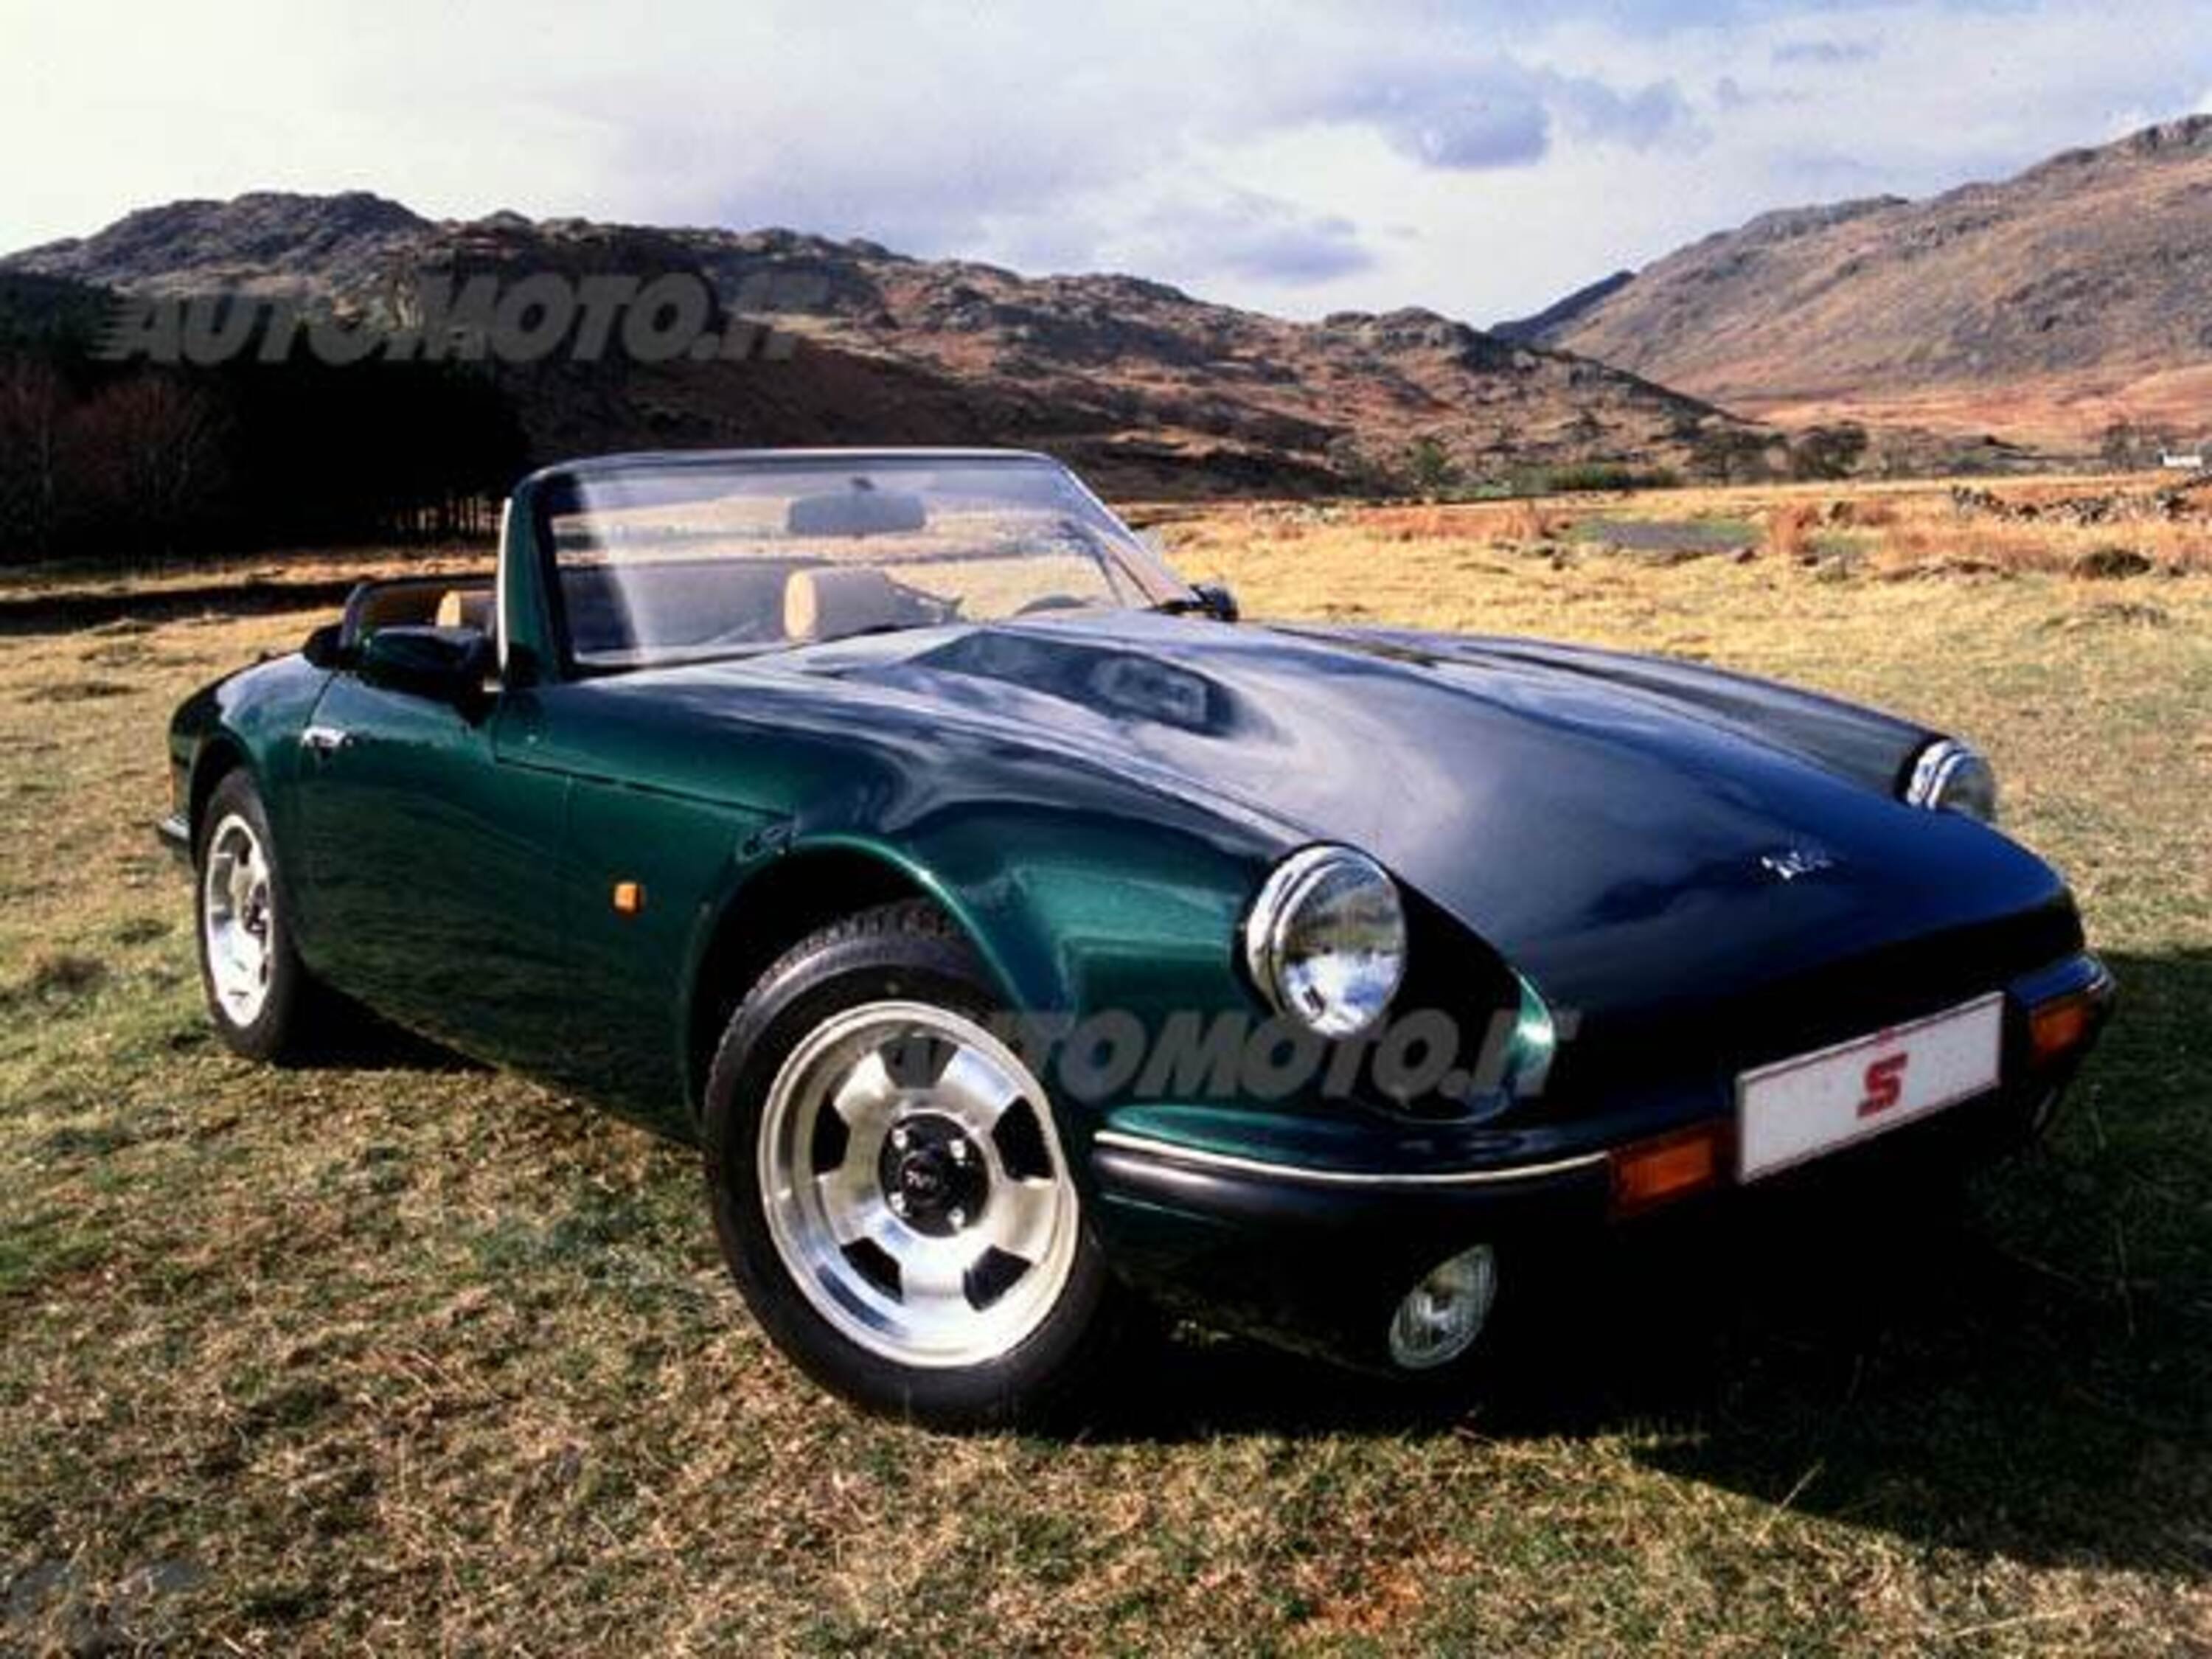 Tvr S 2.0 V8